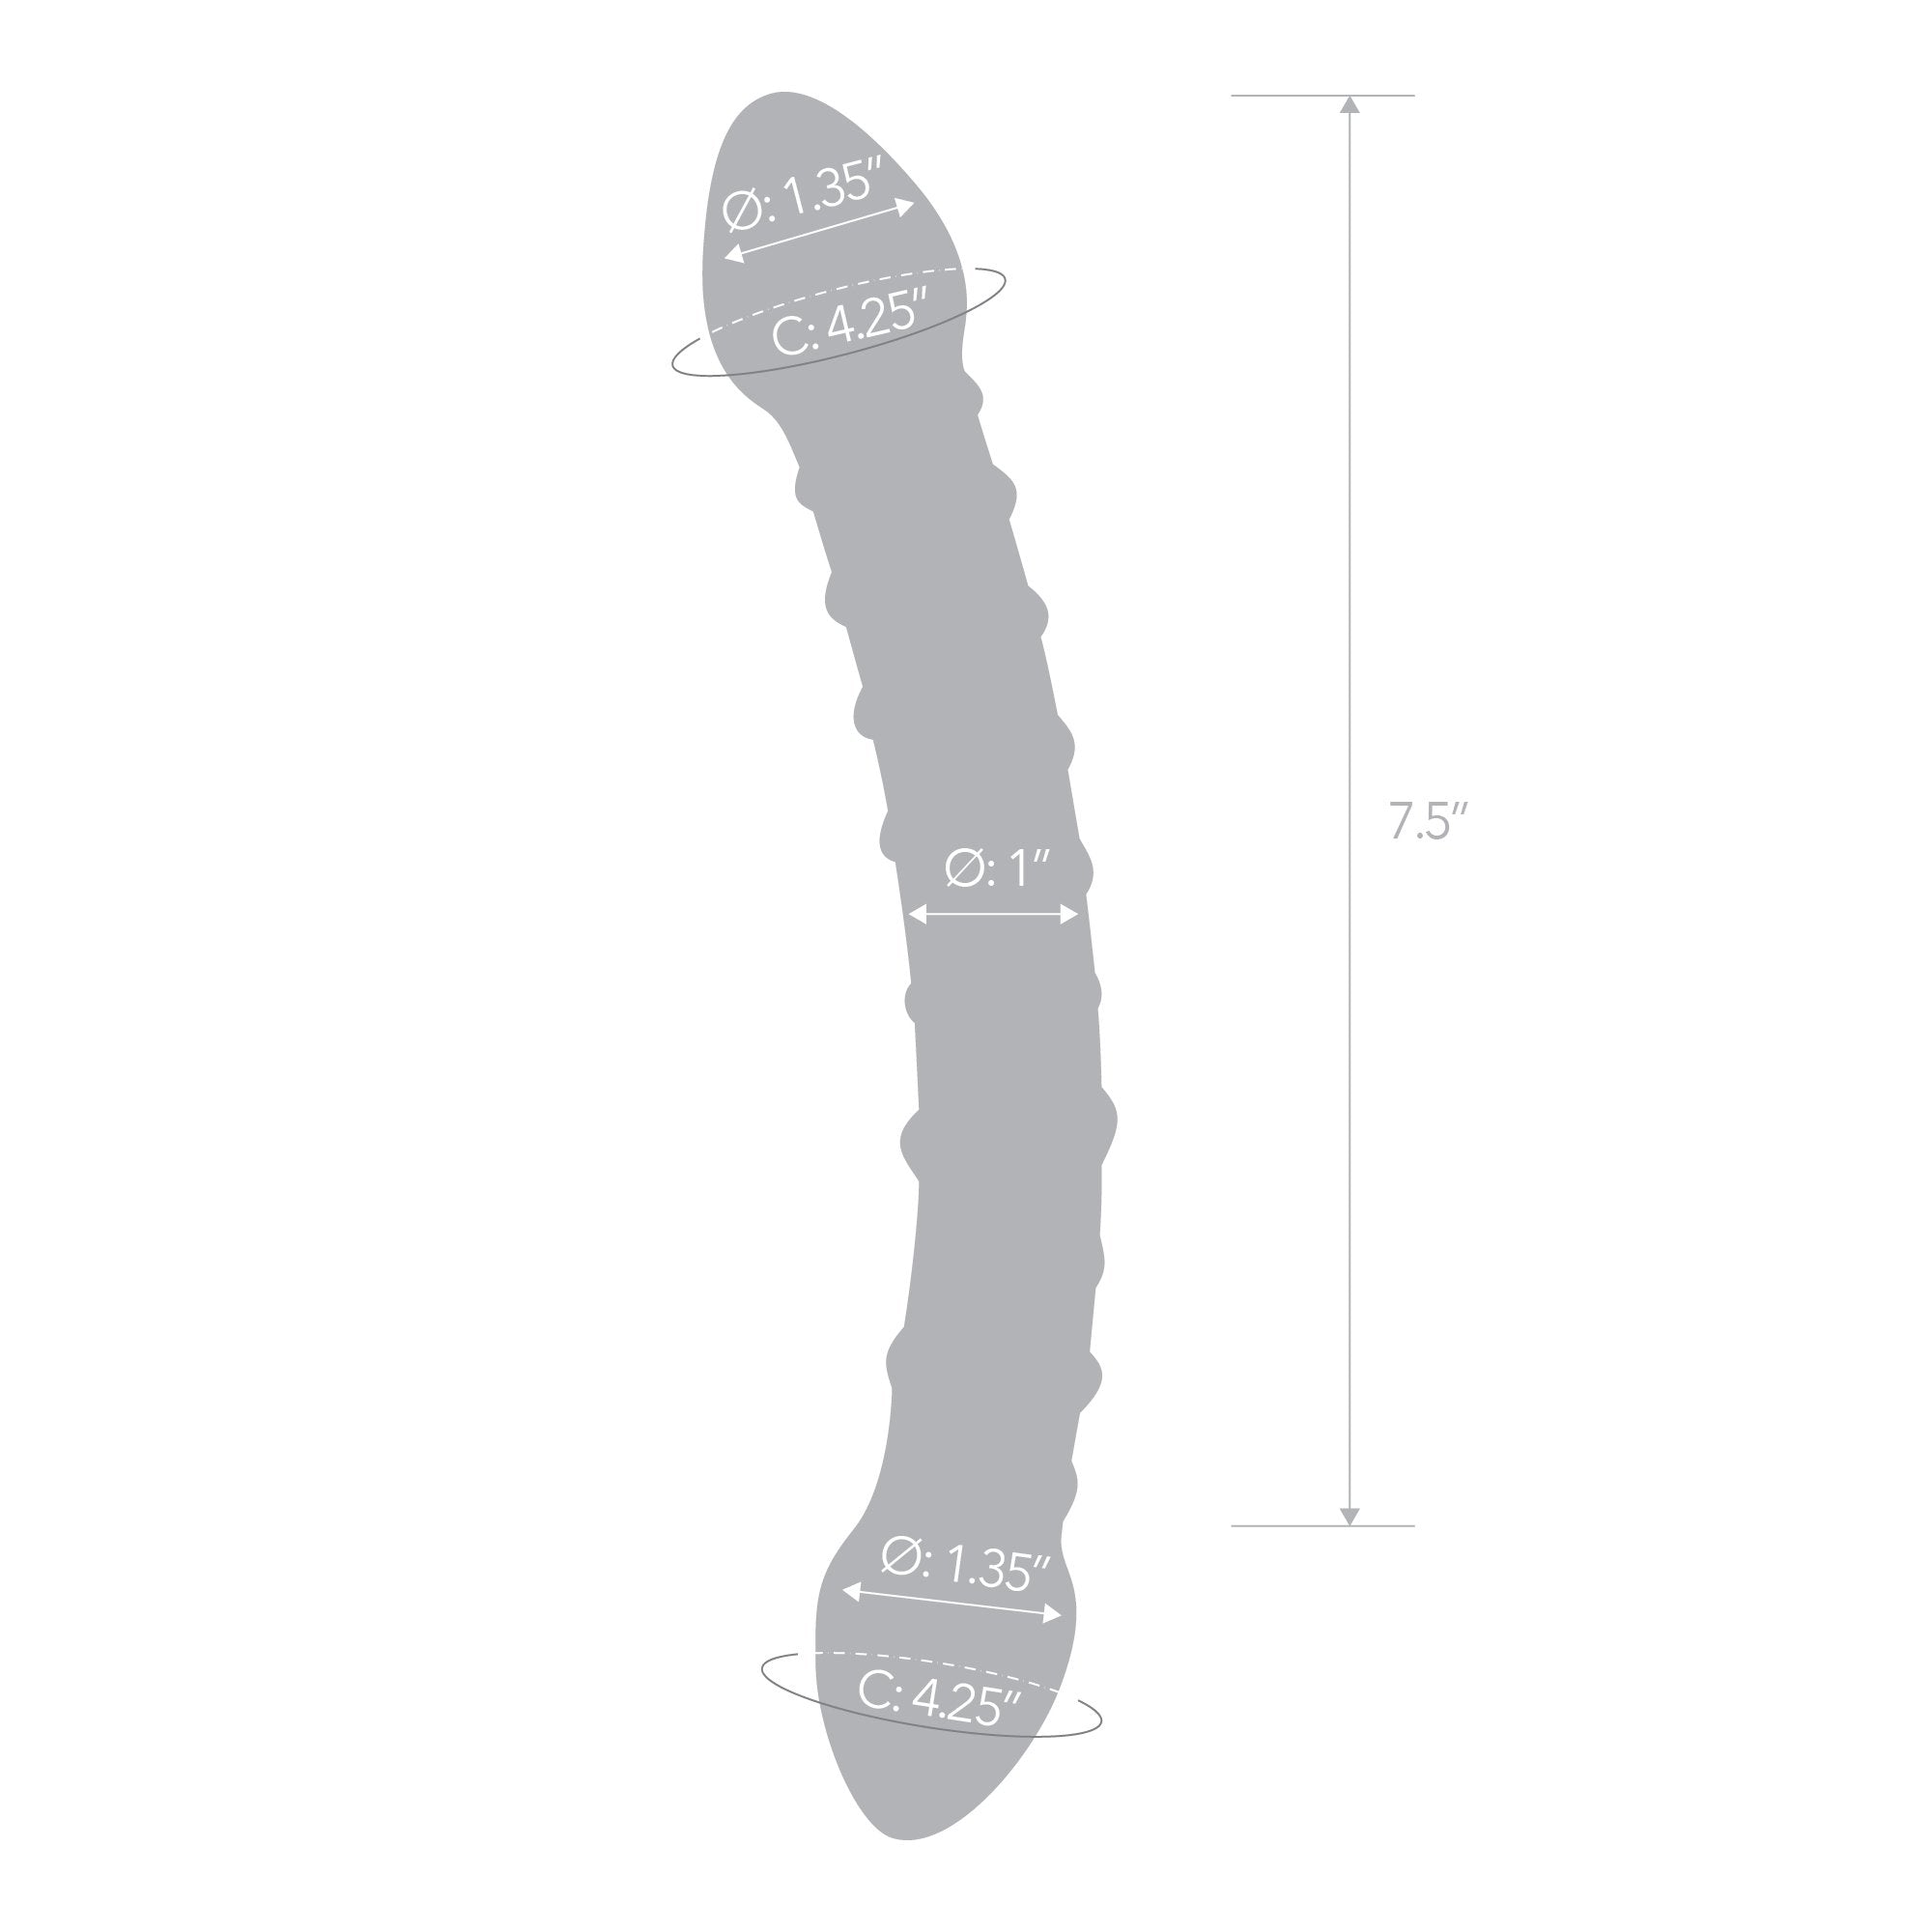 Specifications of the Gläs Double Trouble Glass Dildo